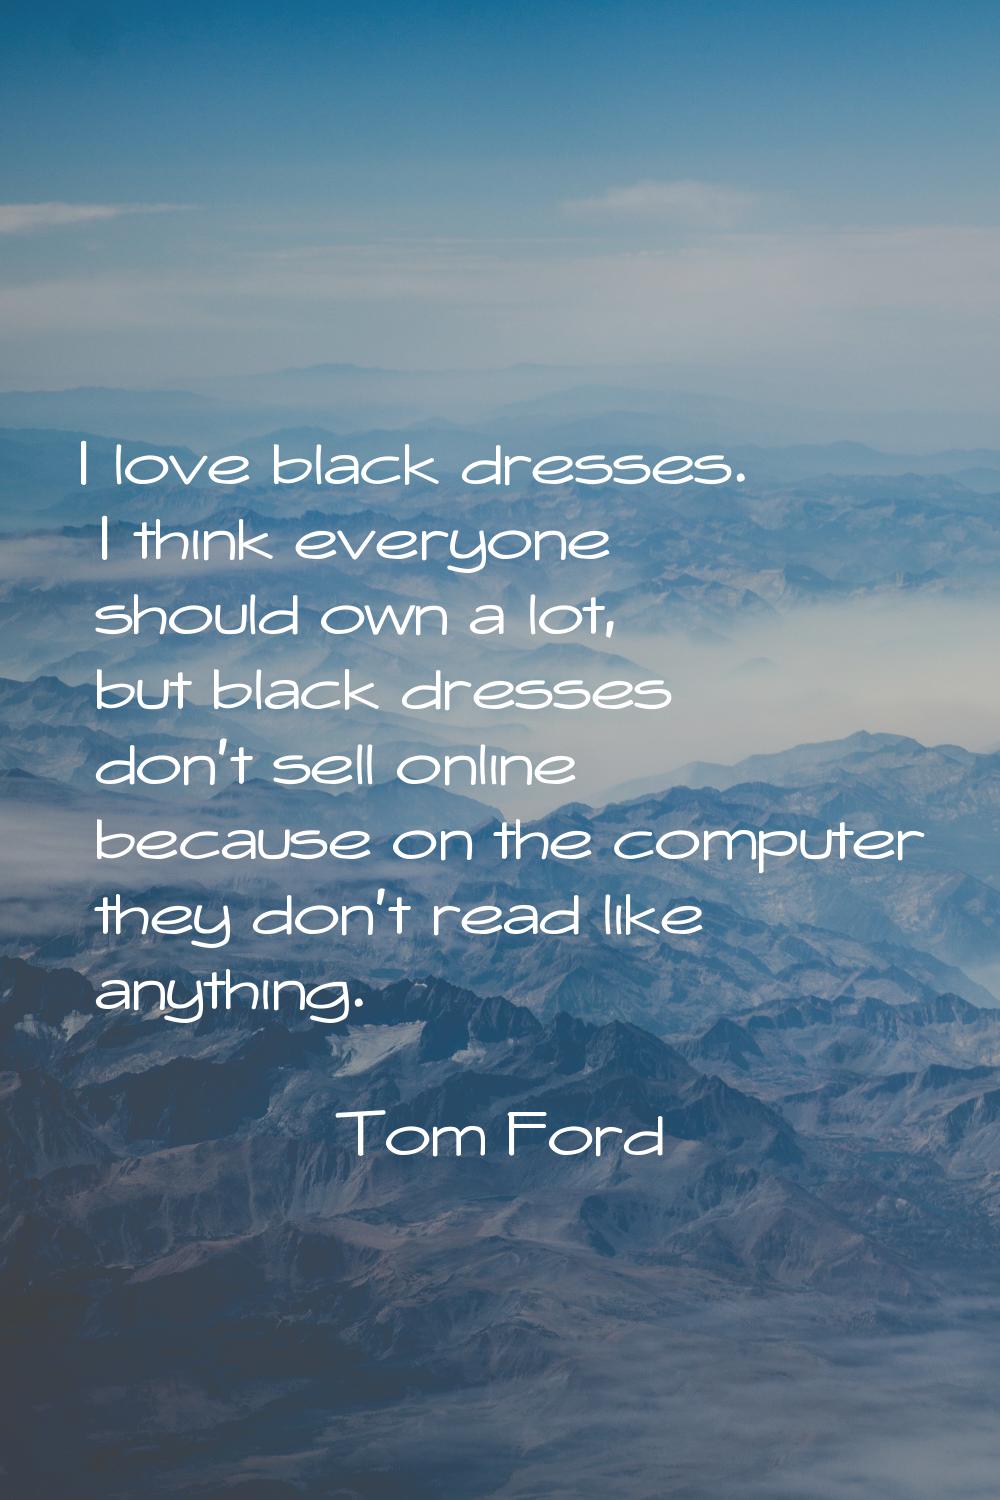 I love black dresses. I think everyone should own a lot, but black dresses don't sell online becaus